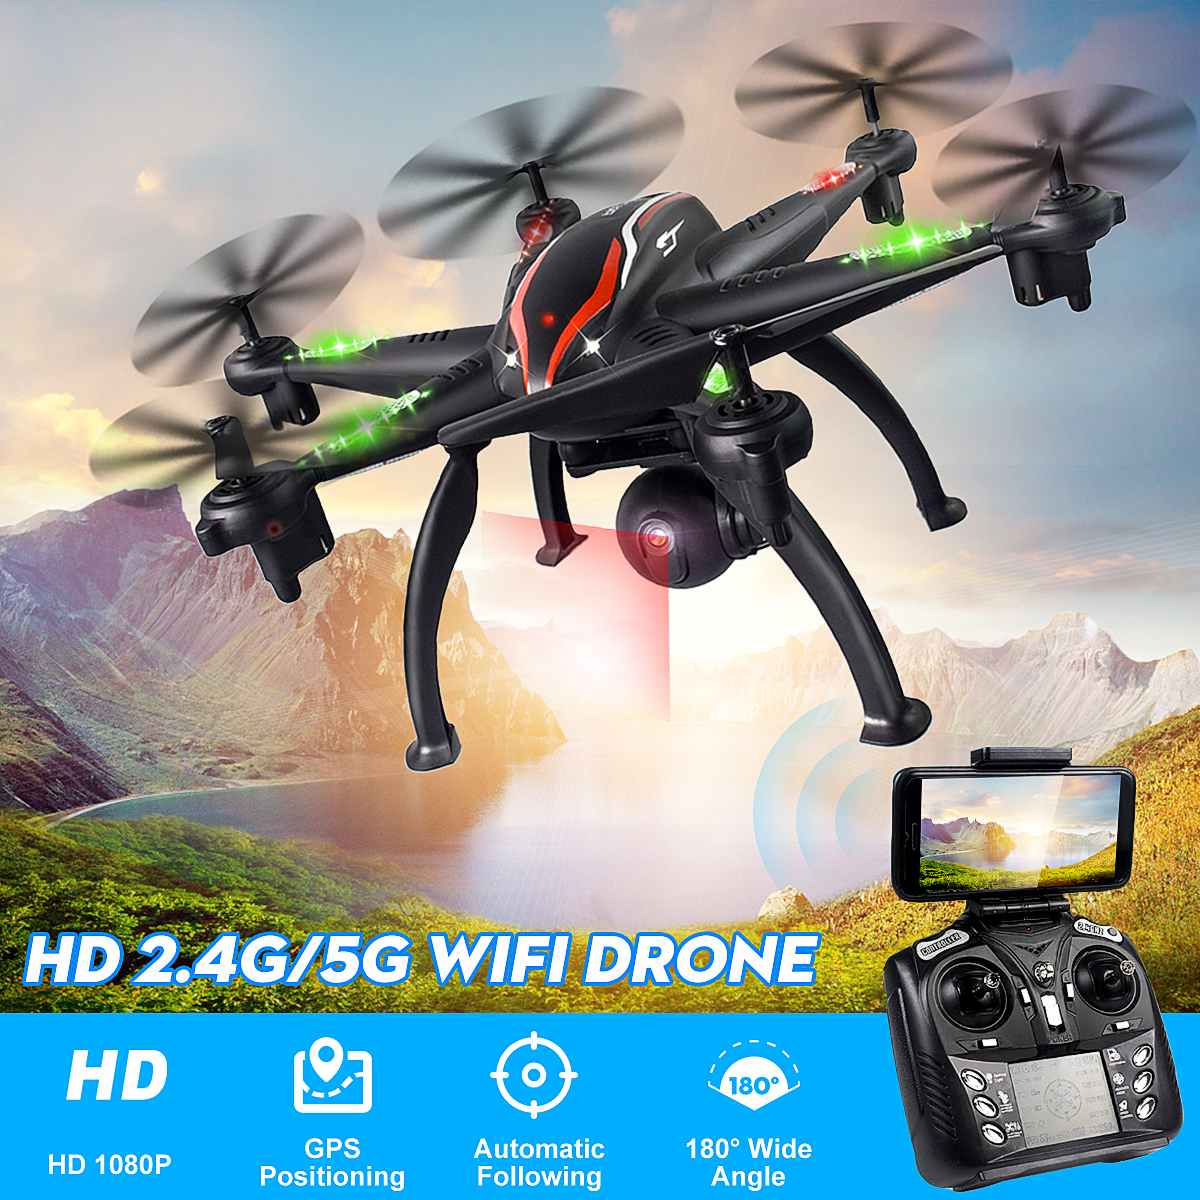 5G WiFi Drone Aerial Photography RC Camera Drone GPS 5G WiFi 1080P Camera Smart Follow Mode 6 Axis Gyro Quadcopter Professional